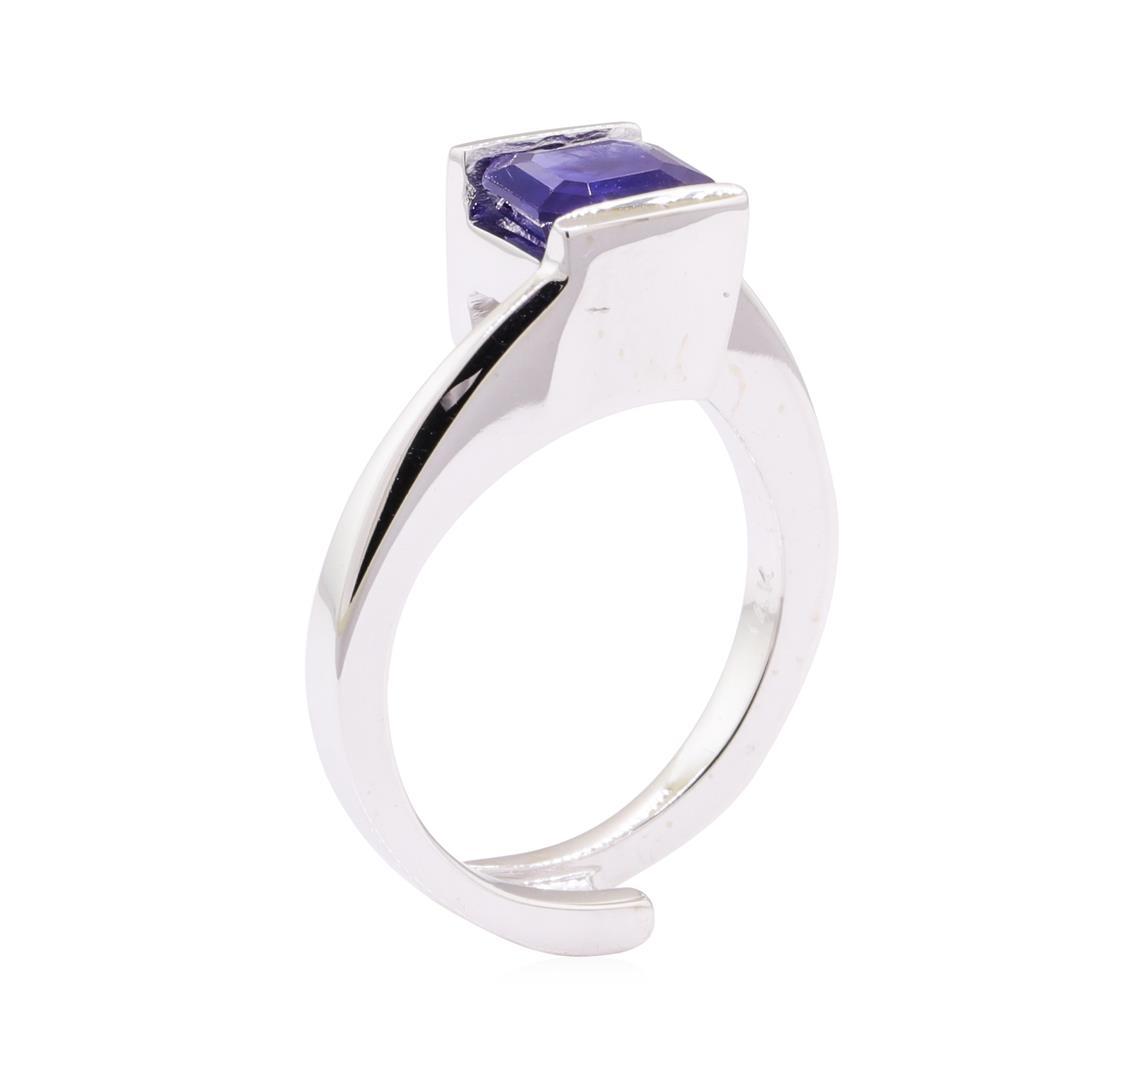 1.50 ctw Blue Sapphire Solitaire Ring - 14KT White Gold